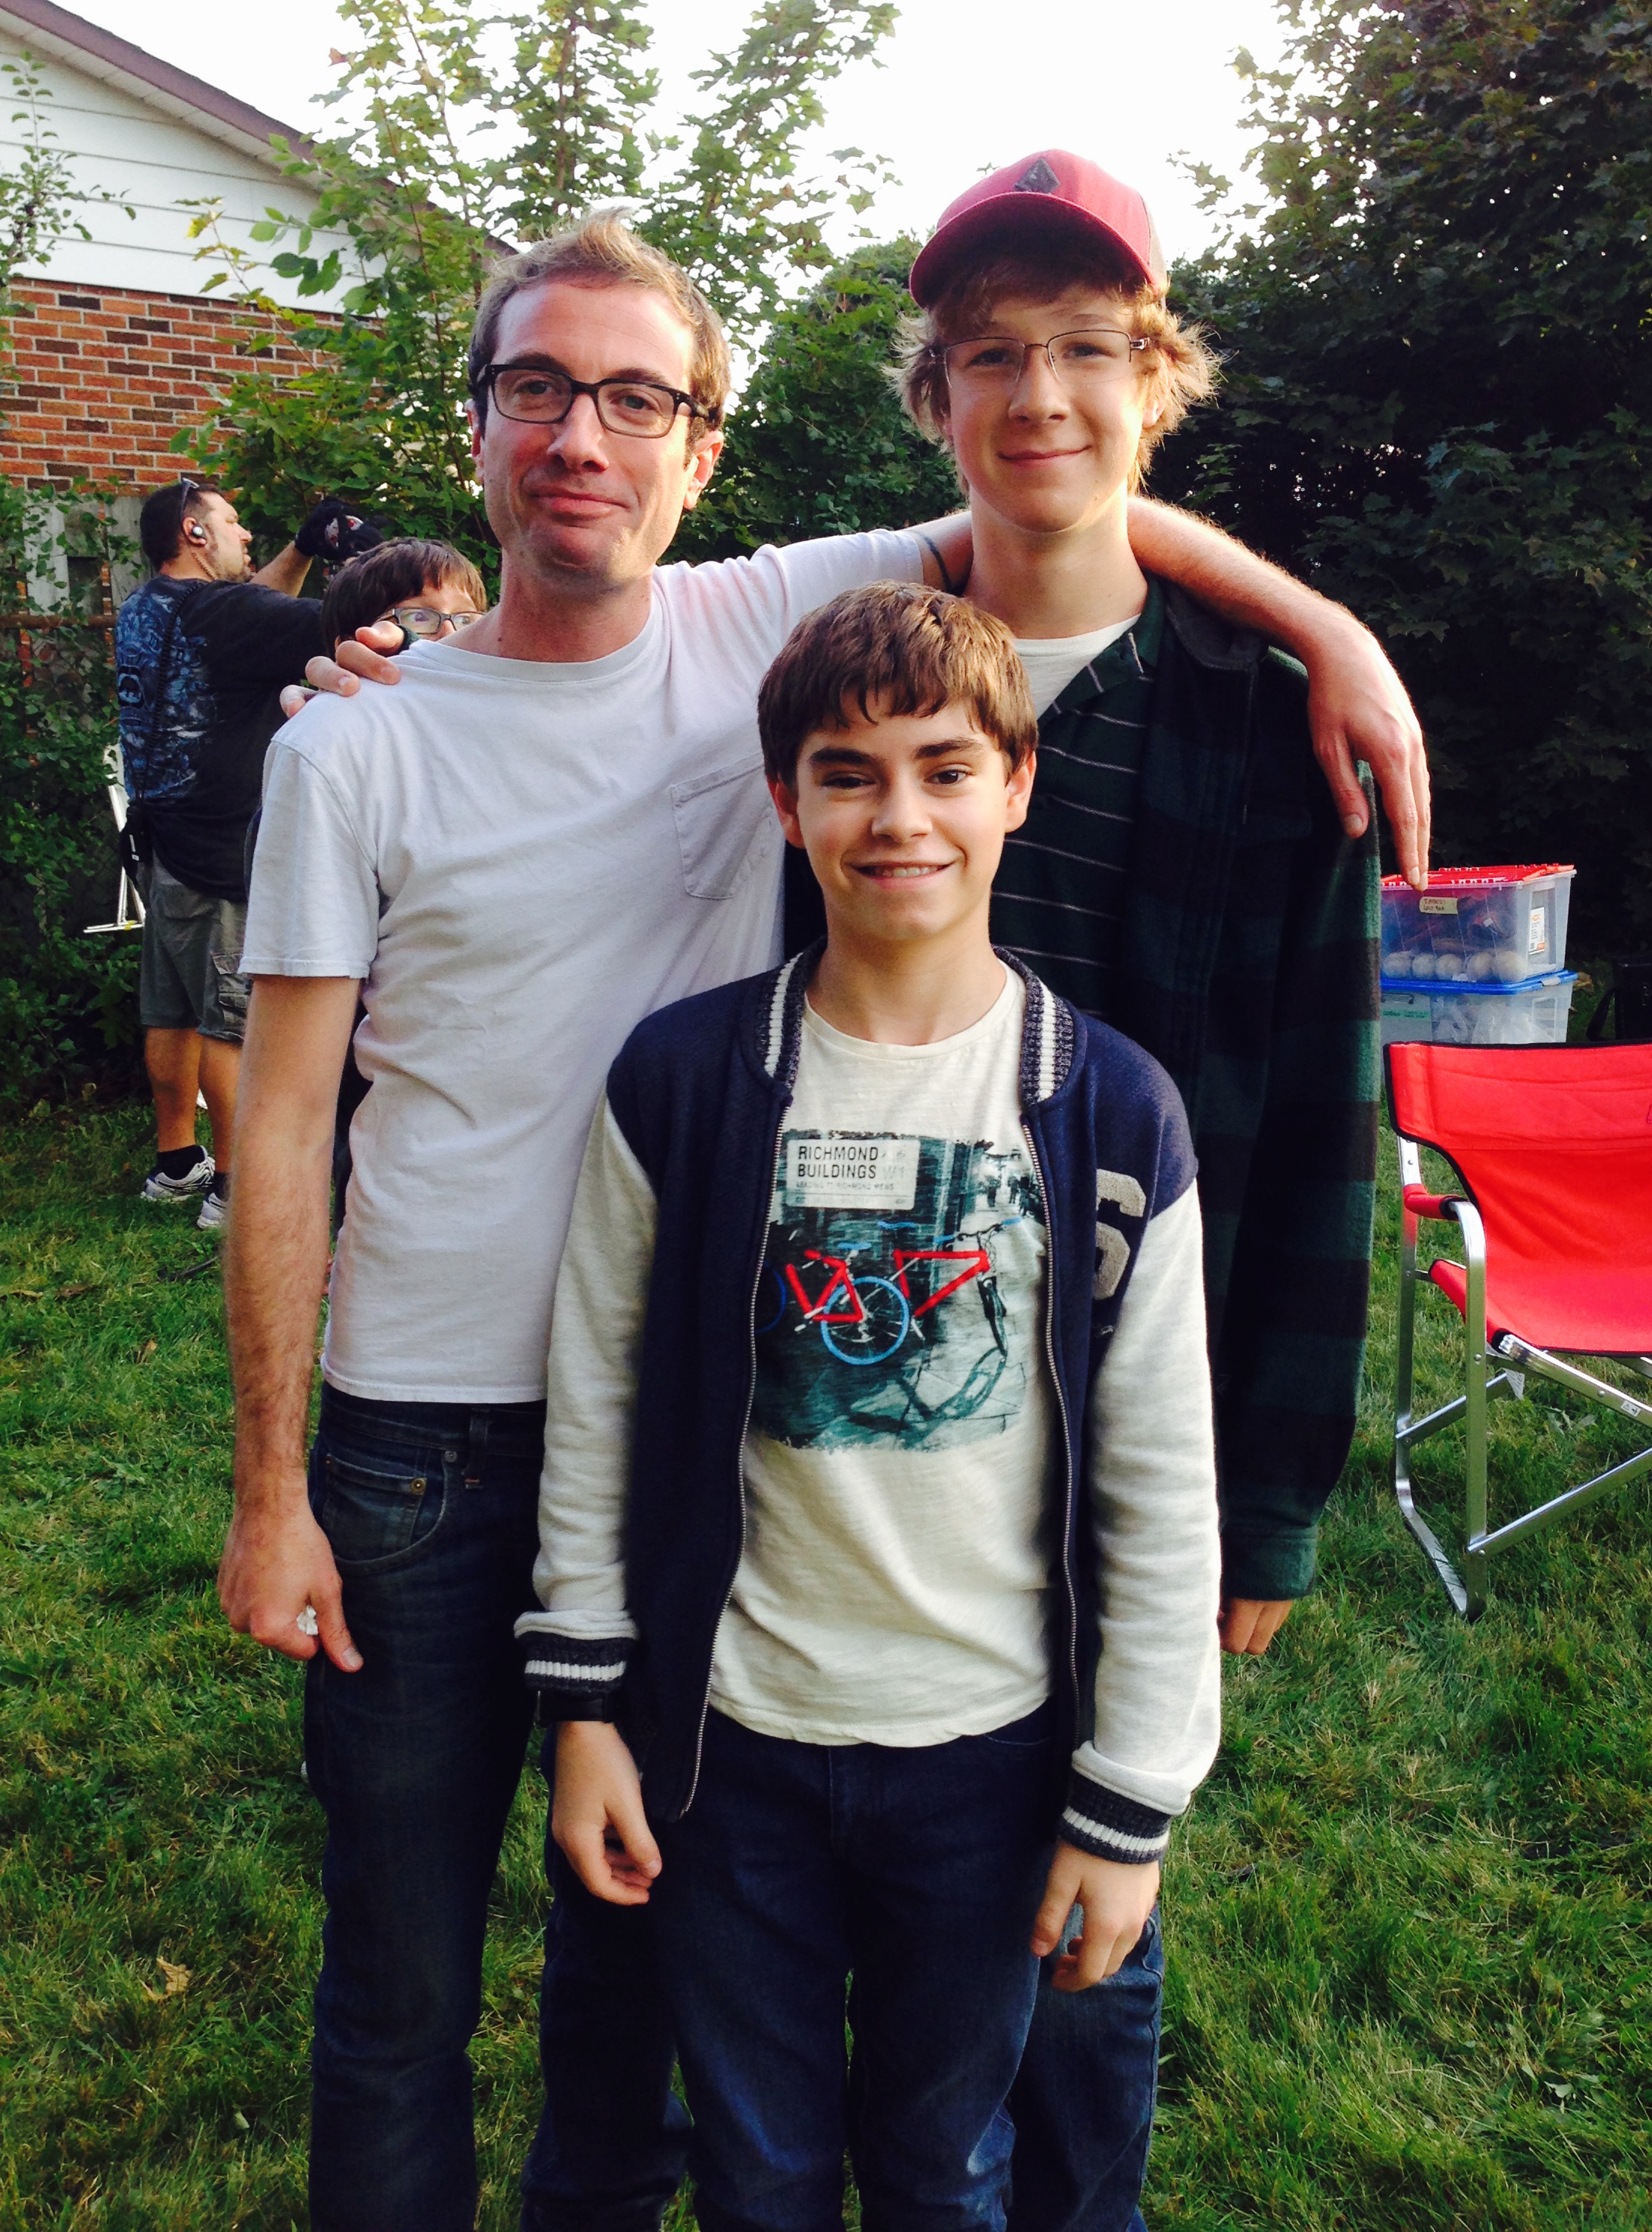 On set with Director Jacob Tierney and actor Jamie Mayers